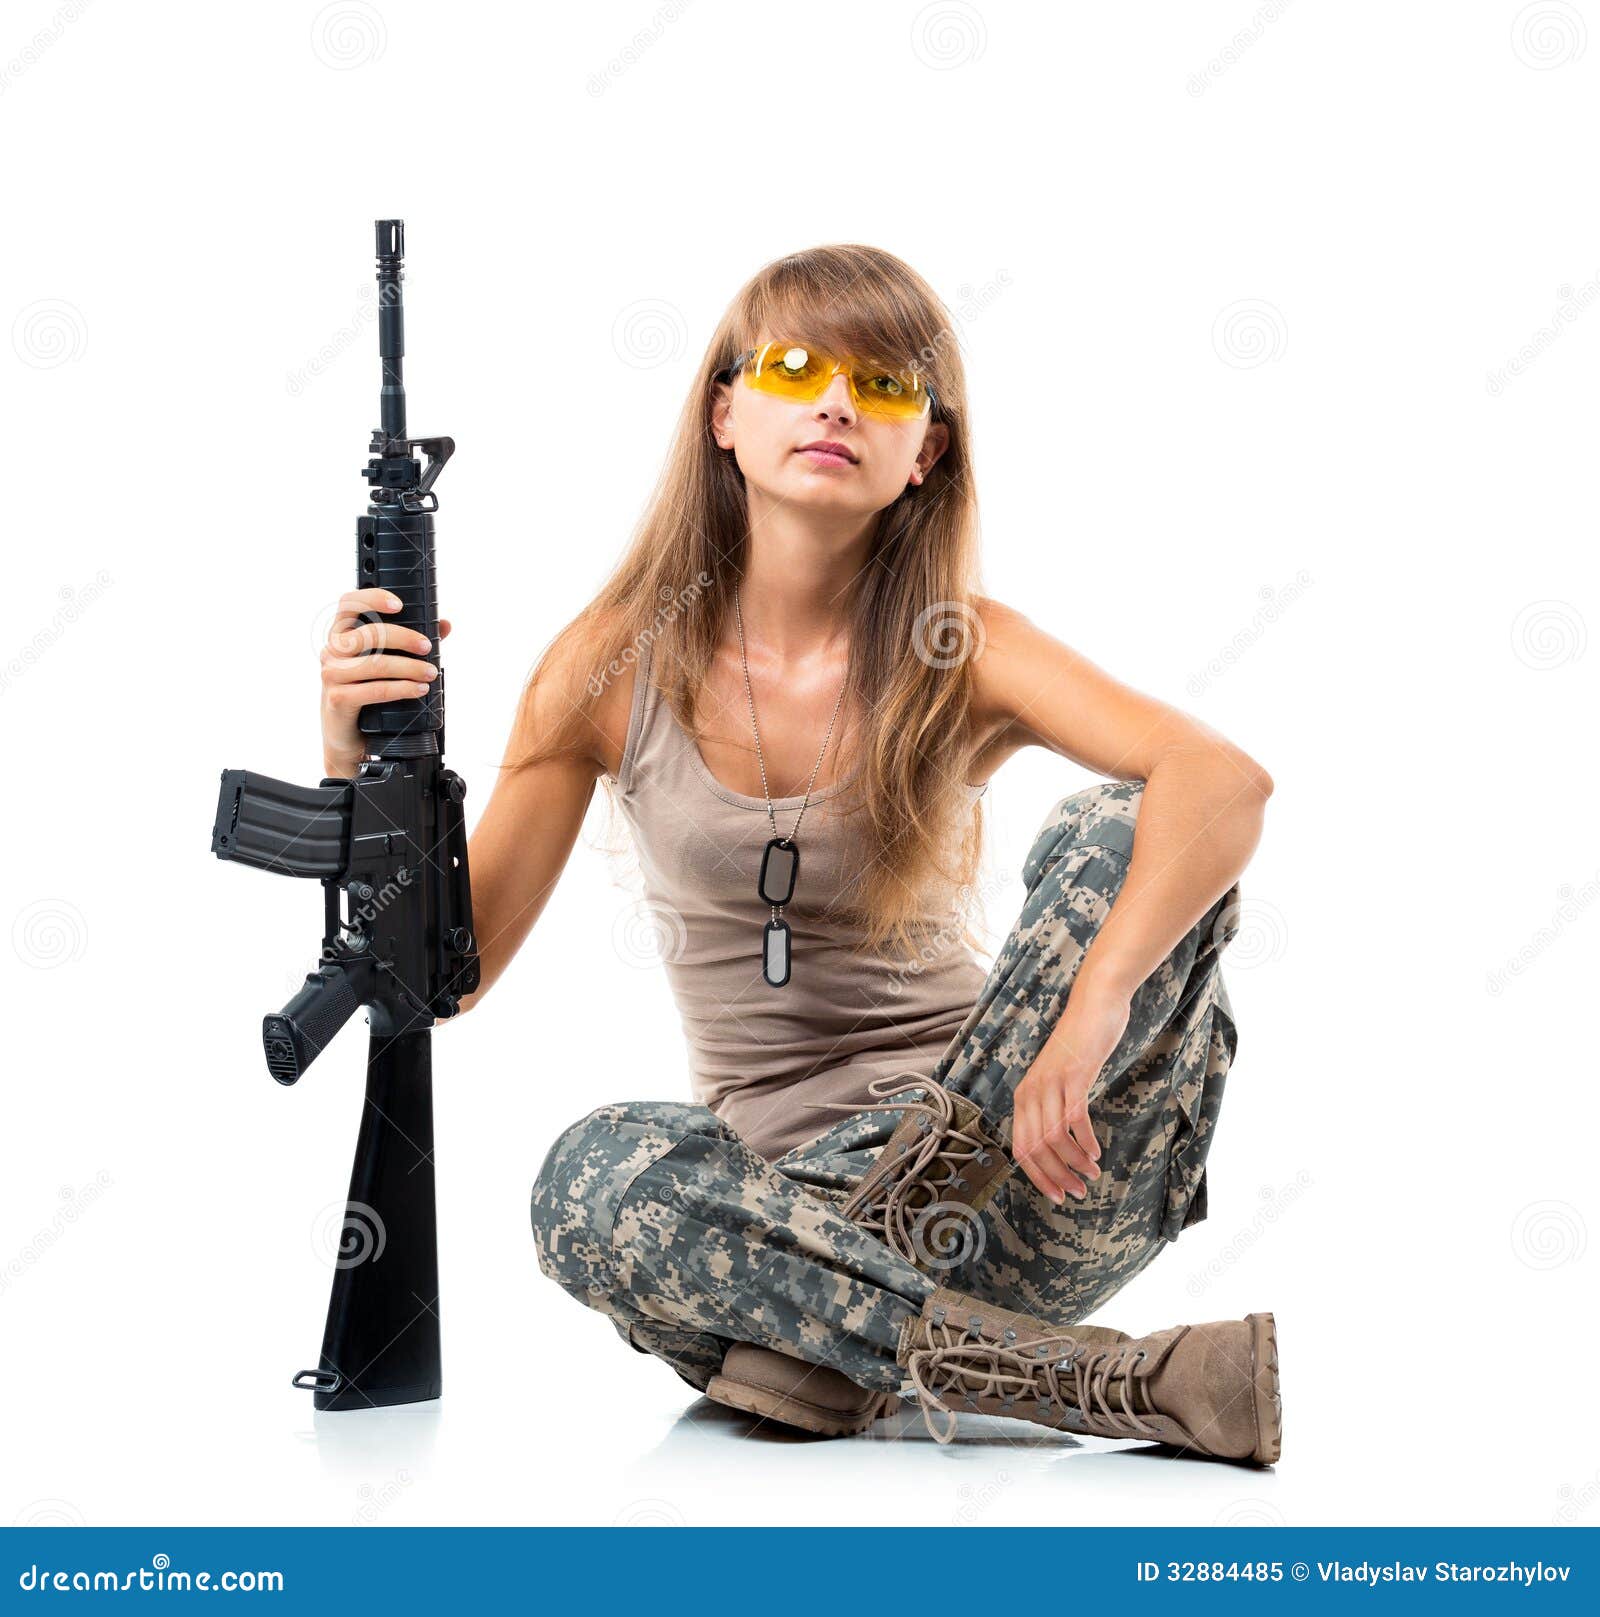 soldier-young-beautiful-girl-dressed-camouflage-gun-his-hand-white-background-32884485.jpg